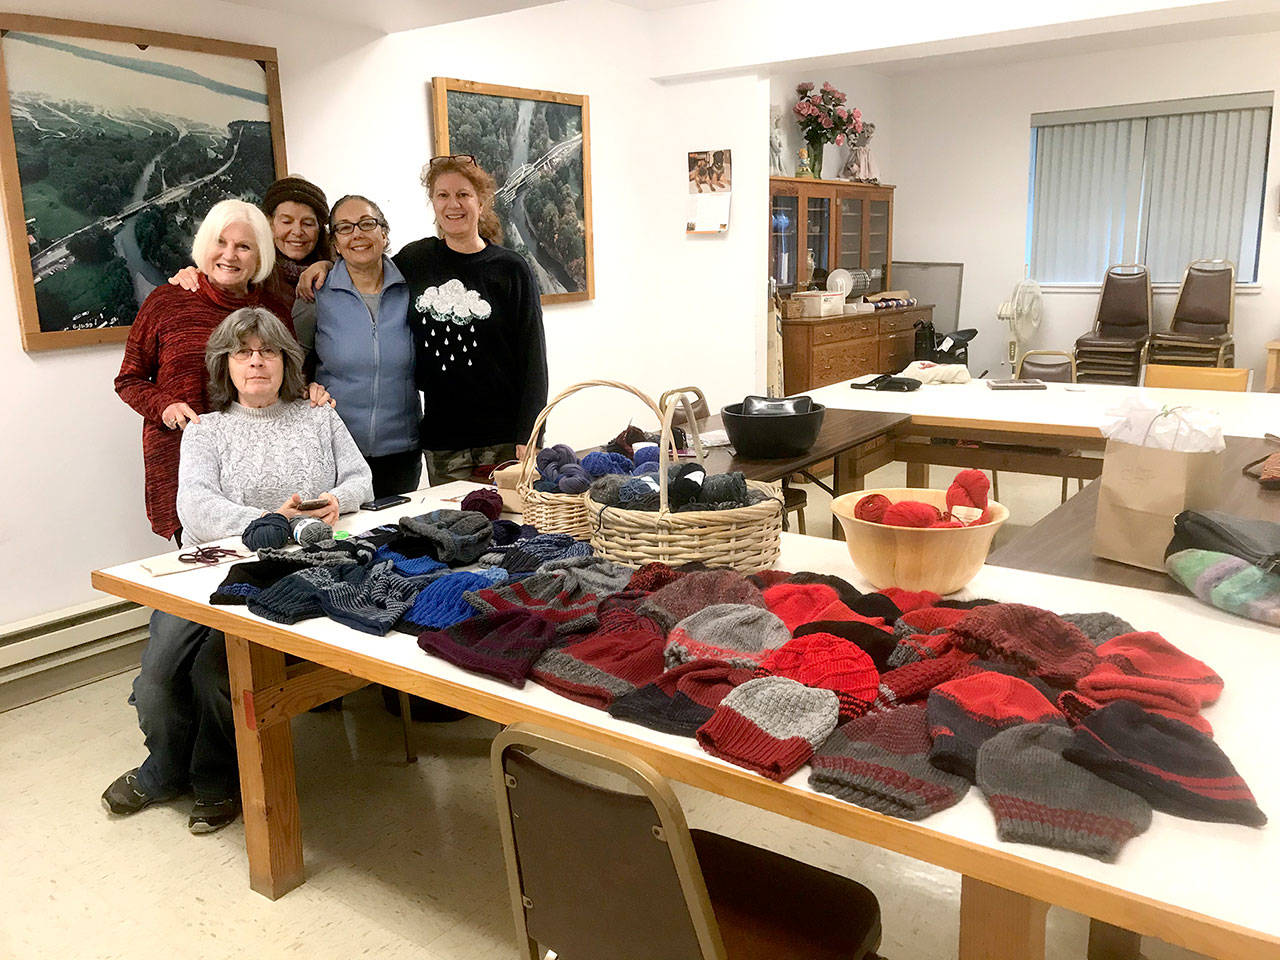 Brinnon and Quilcene Community Knitters members Pam Barnet, Nancy Nash, Cindy Germaine, Belinda Graham and Lise Solvang stand behind a table covered with hand-knit caps to be given to first responders at the Brinnon Community Center. (Brinnon and Quilcene Community Knitters)